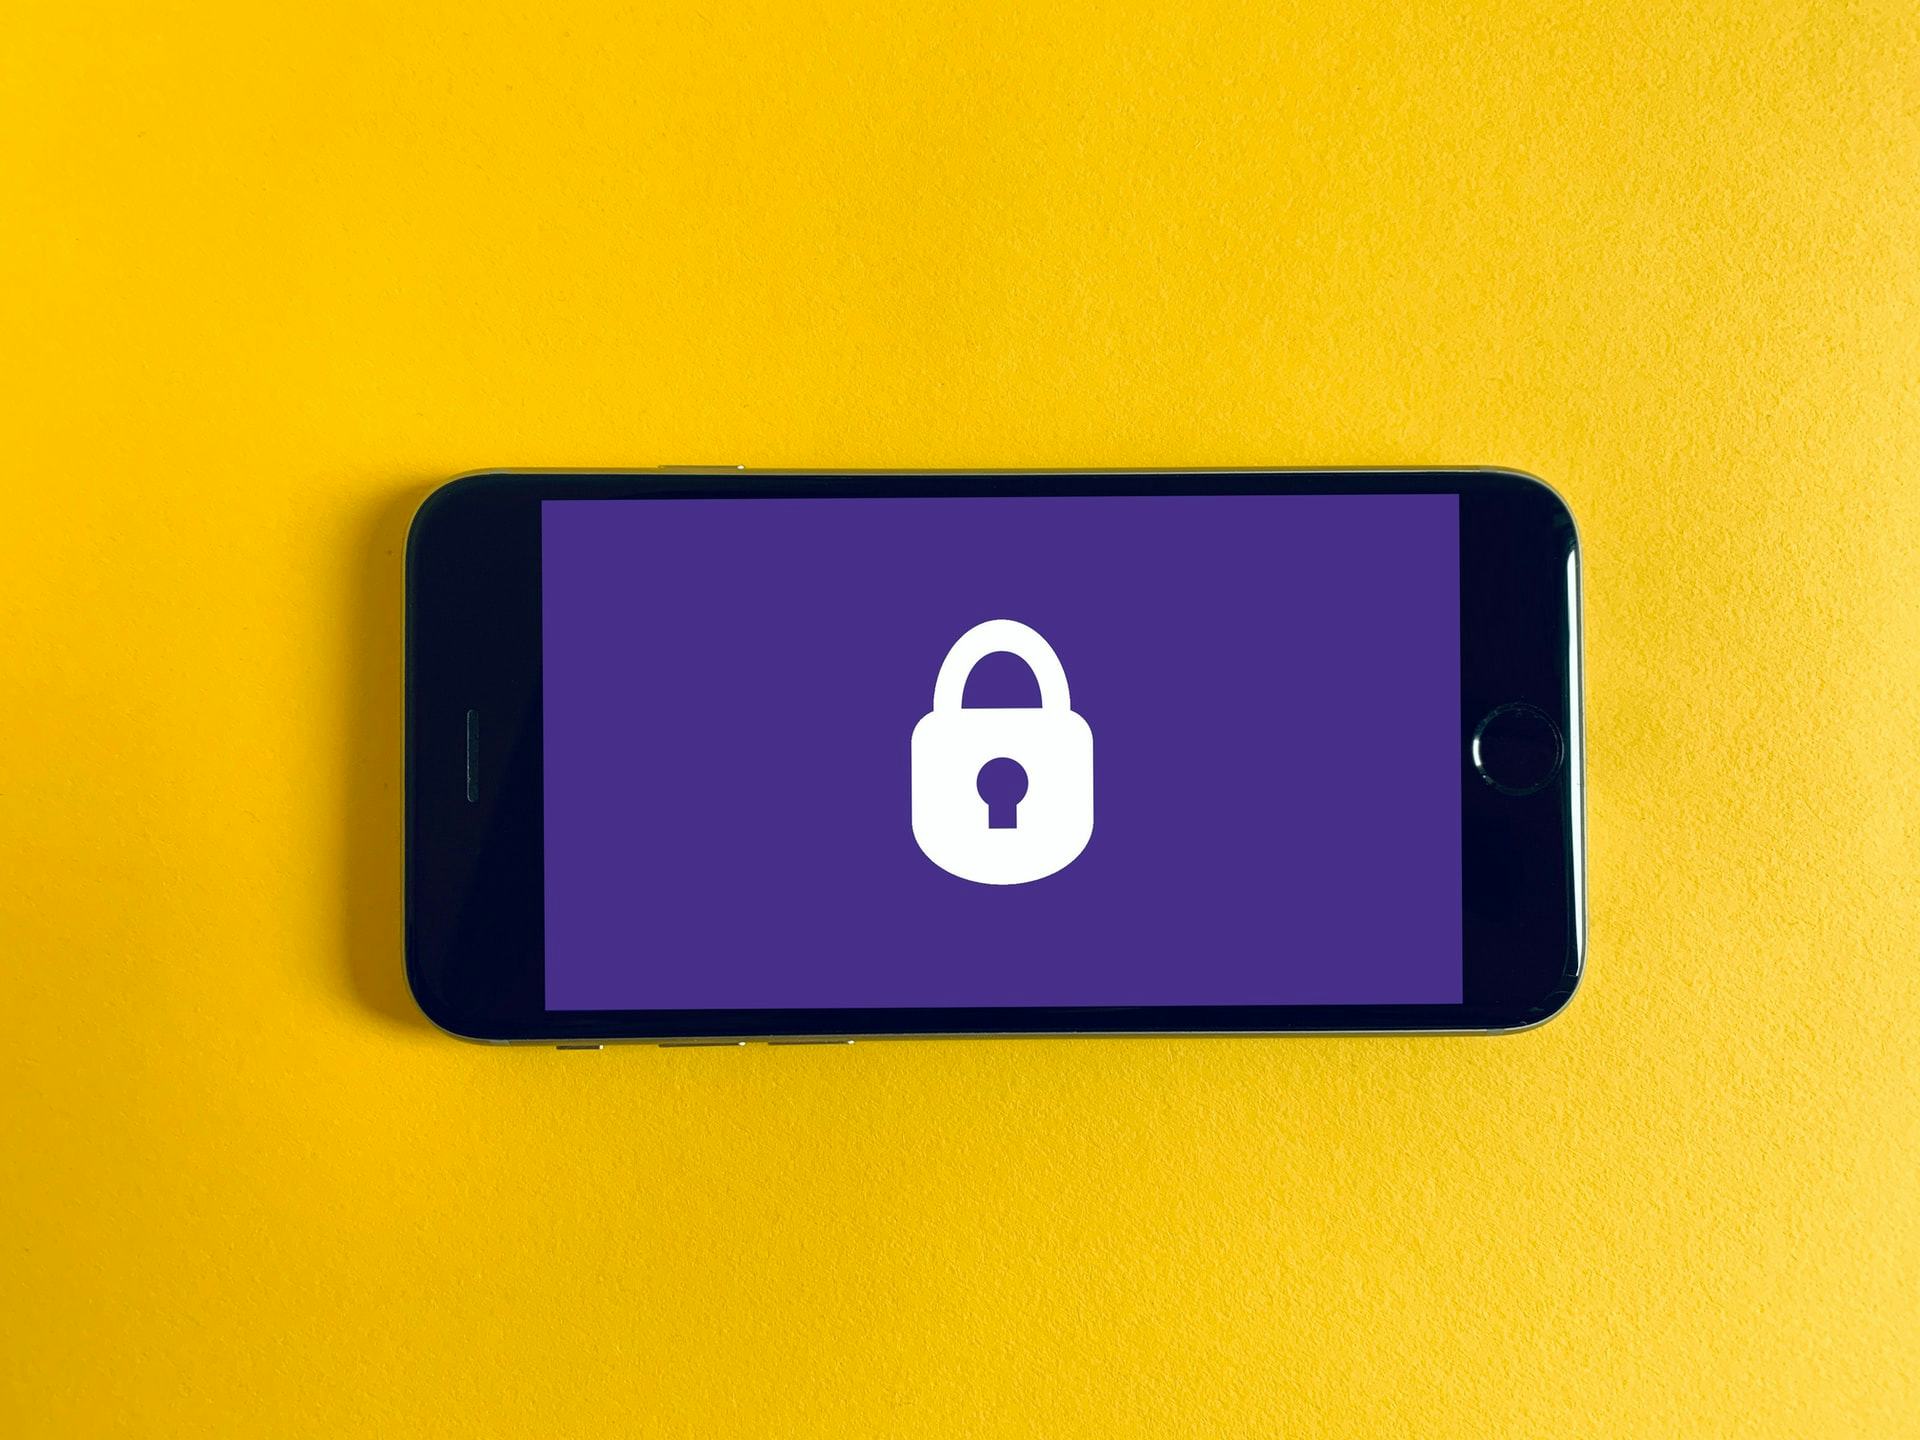 Photo of a white lock icon on a purple fullscreen background displayed on a cellphone screen